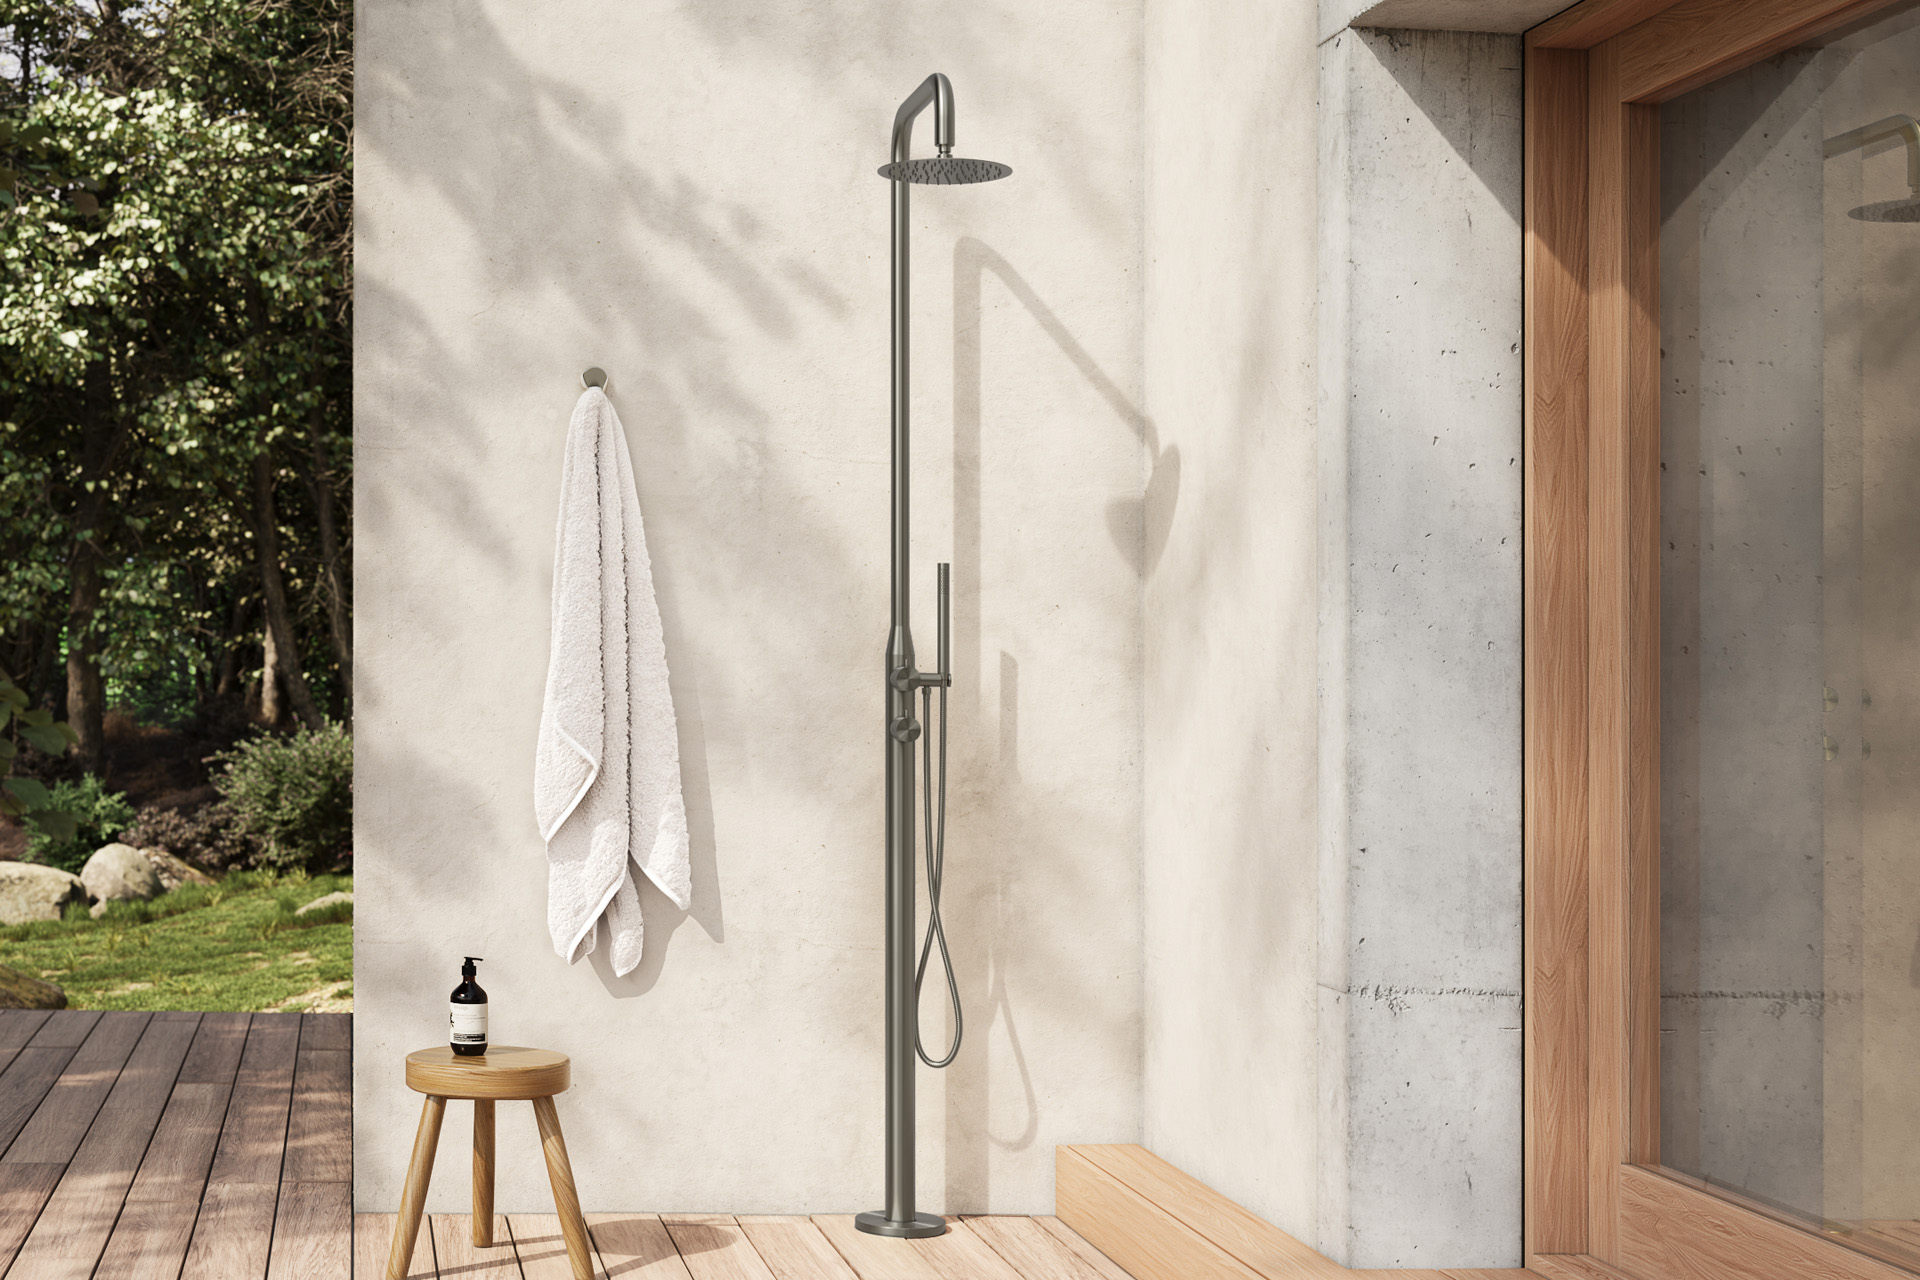 Transform Your Garden Into A Refined Oasis With ABI Interiors' New Outdoor Shower Range